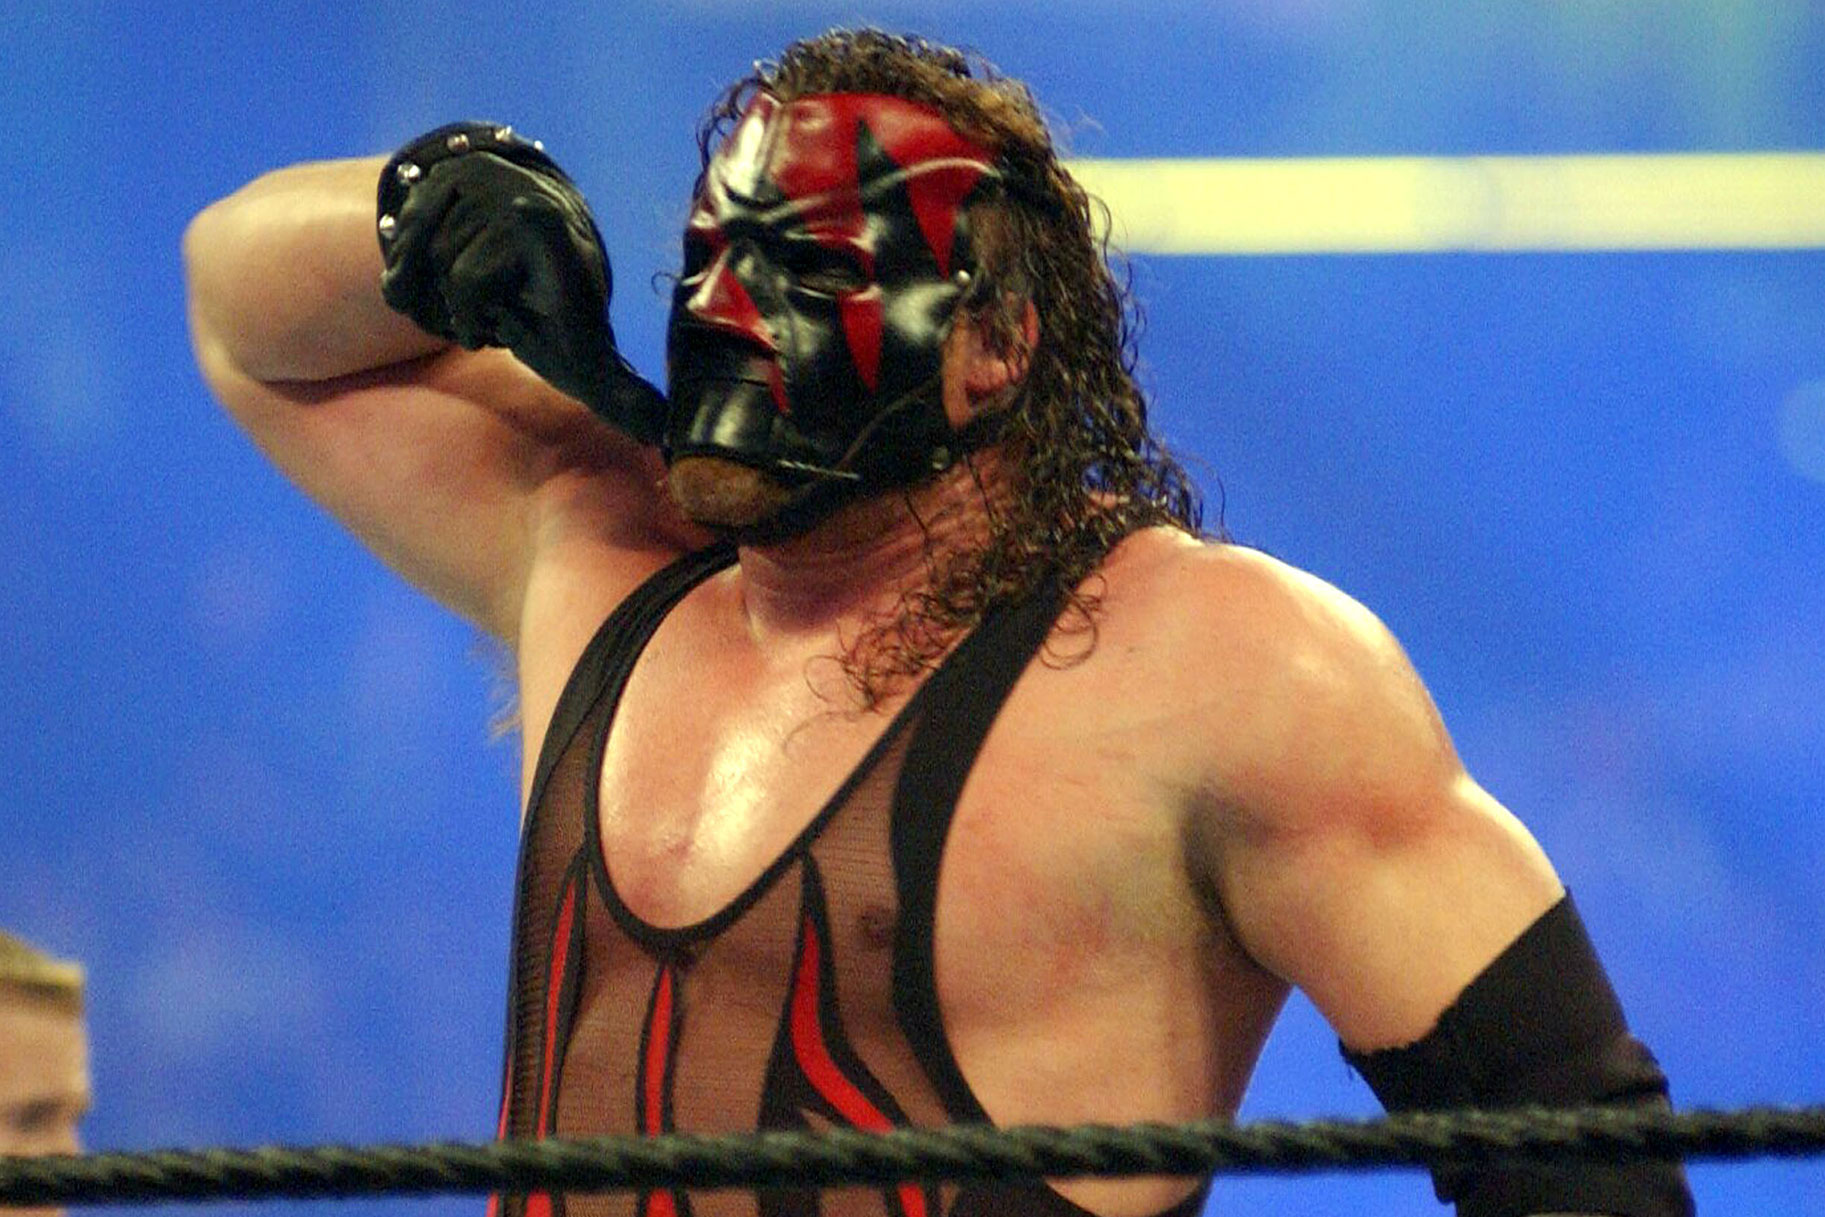 Kane in the ring with his red and black mask on